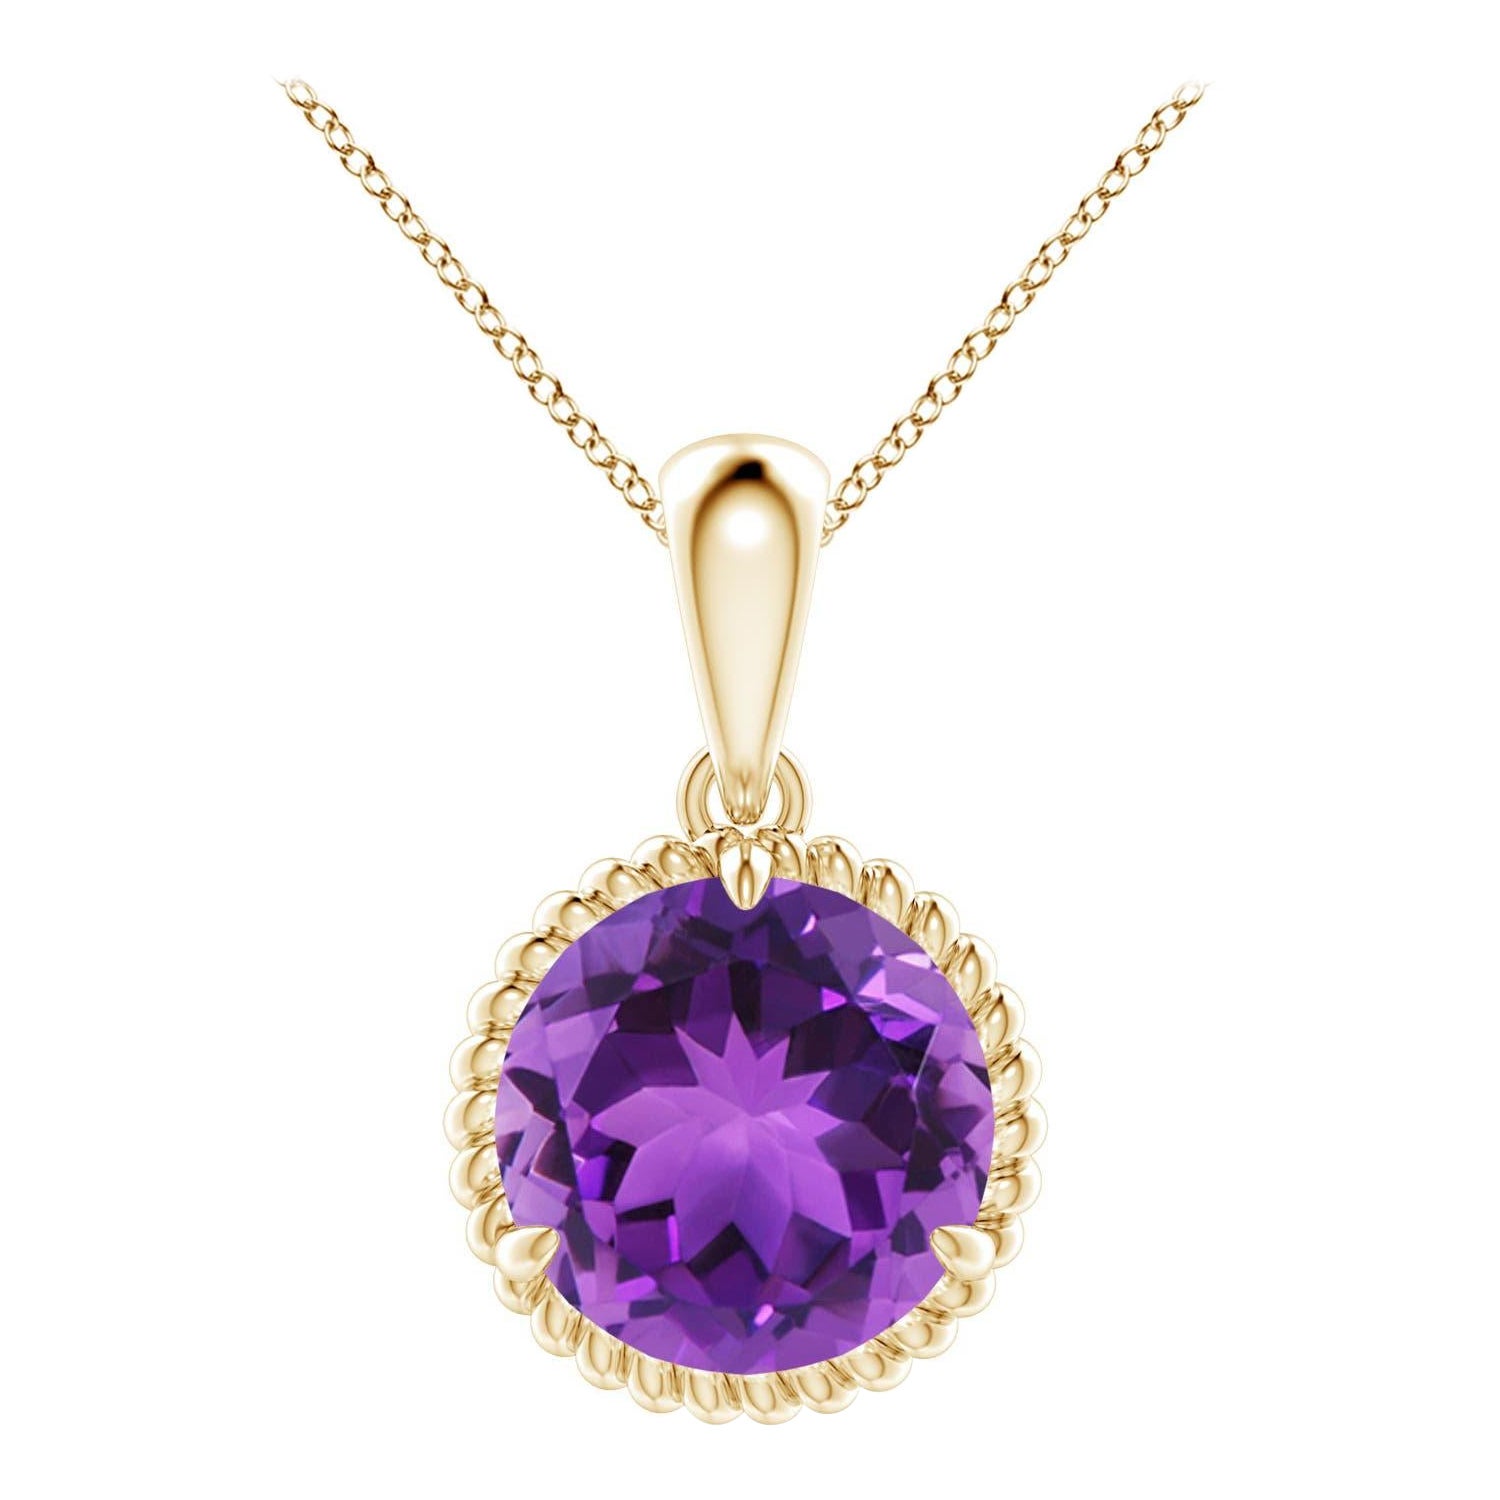 Natural Rope-Framed 3.2ct Amethyst Solitaire Pendant in 14K Yellow Gold